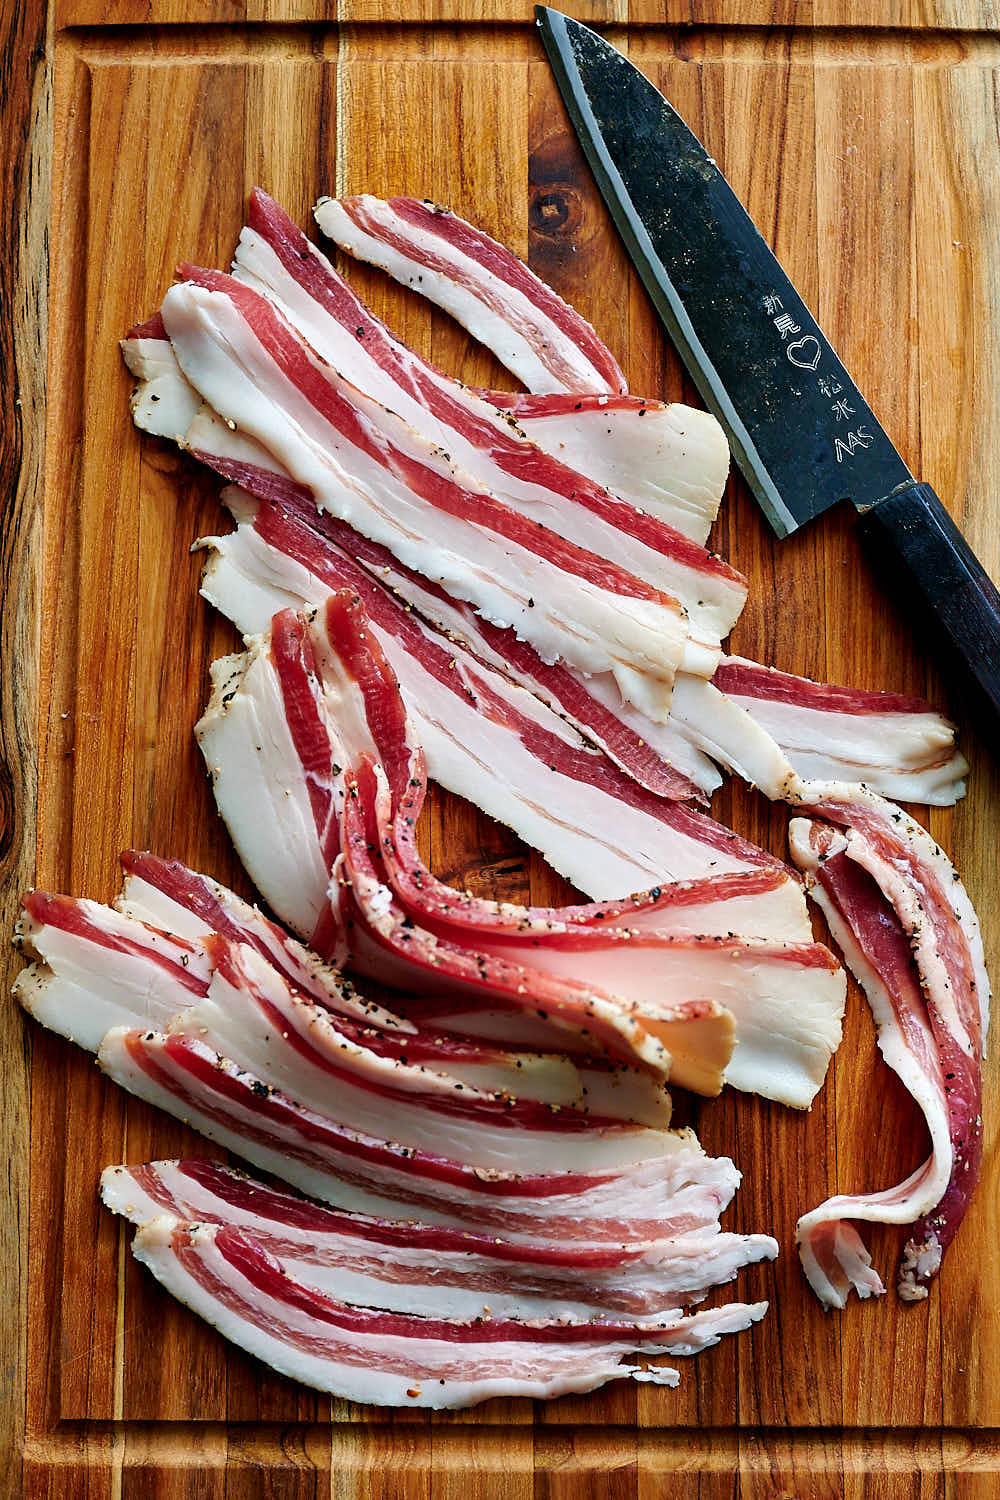 Thick cut bacon slices.